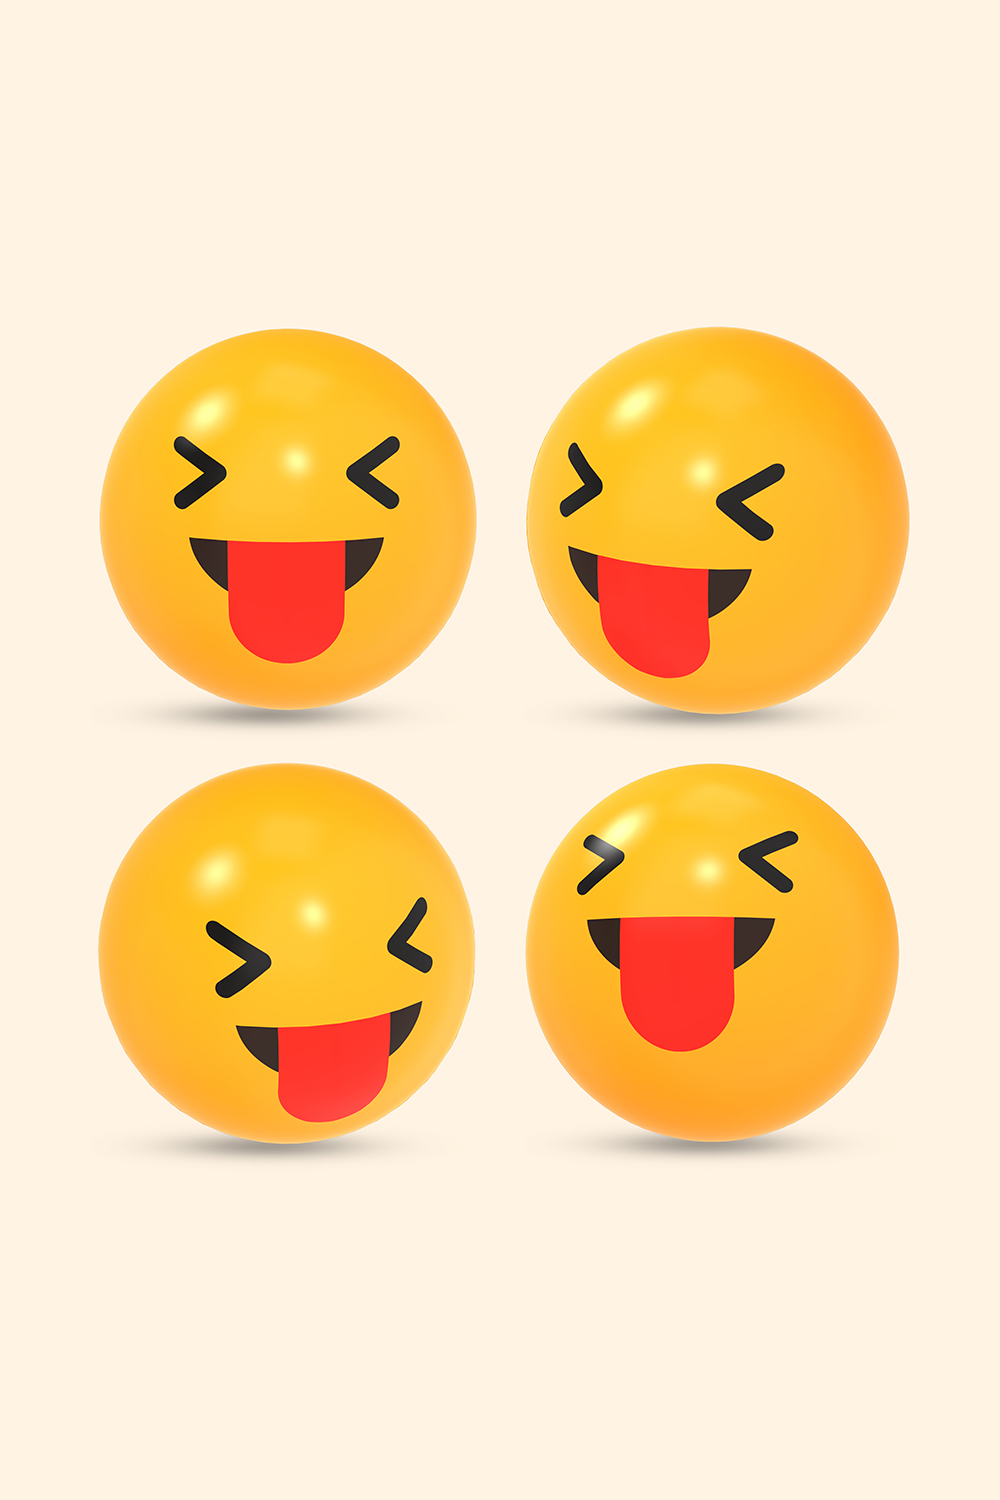 3D rendered social media icon of squinting Face with tongue out emoji reaction with different view pinterest preview image.